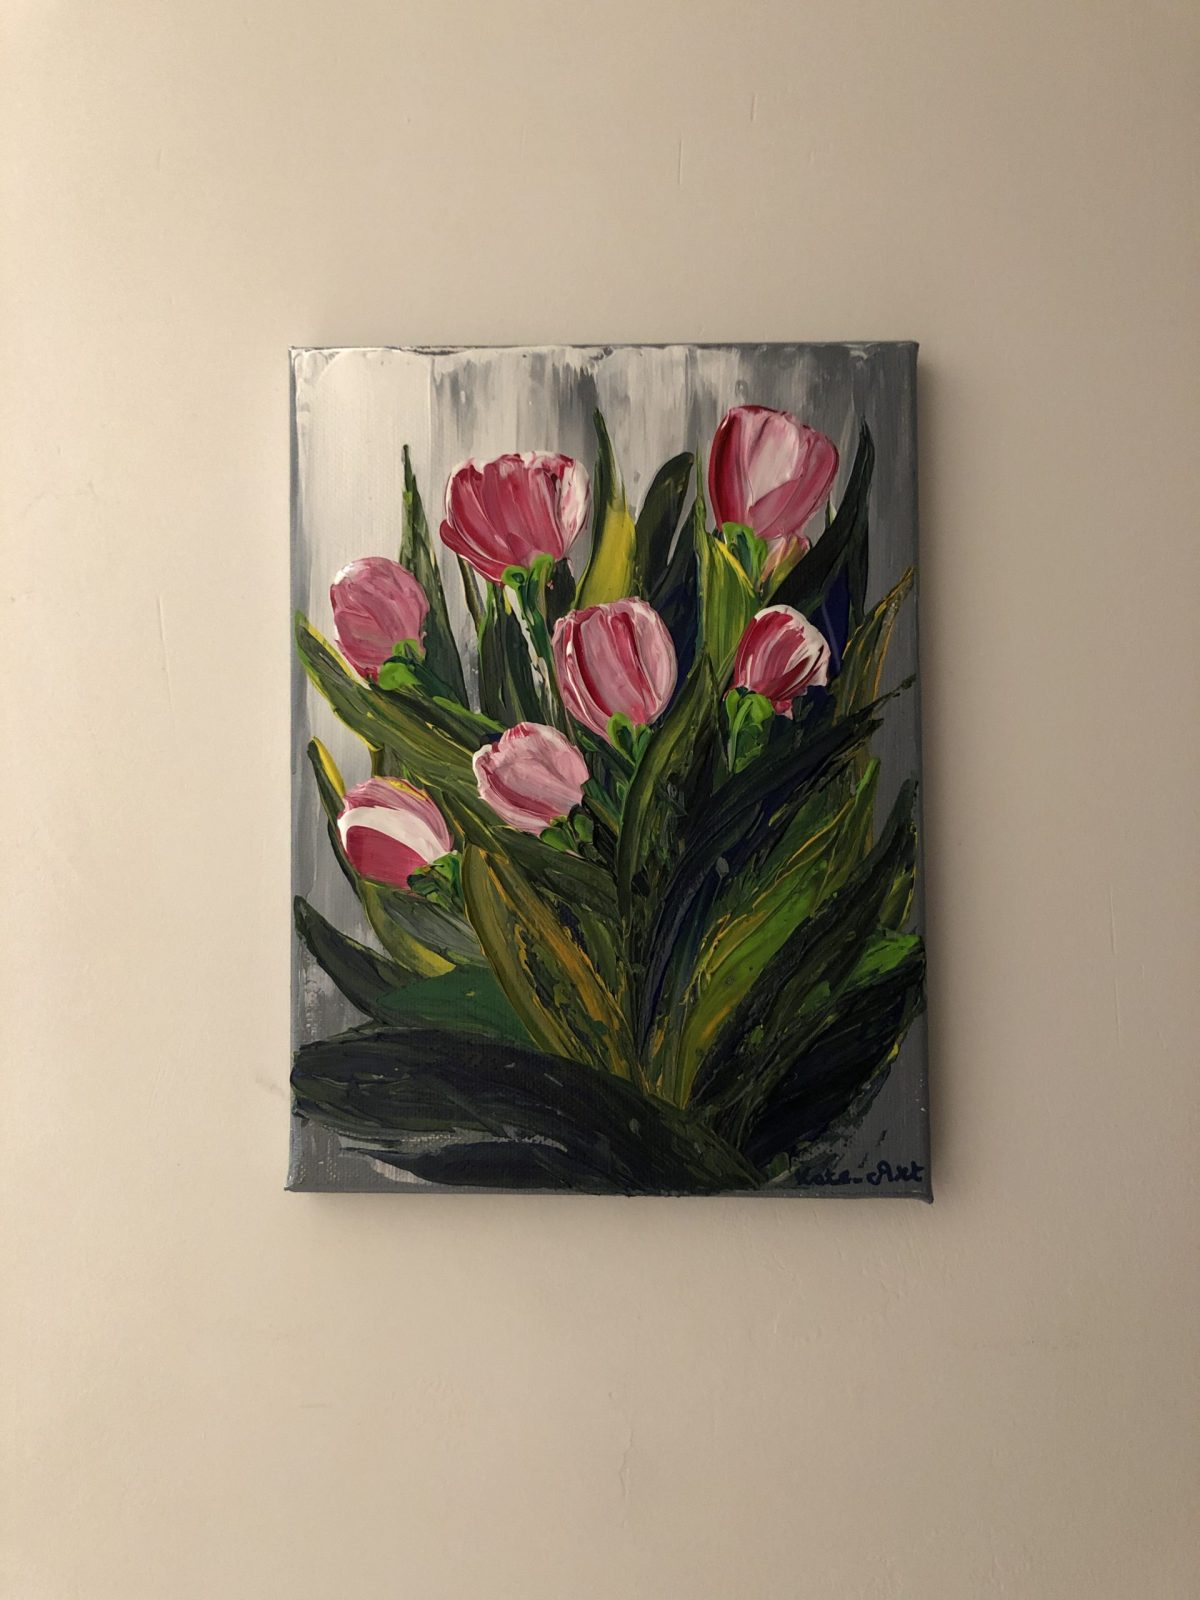 Tulips exposed on the white wall